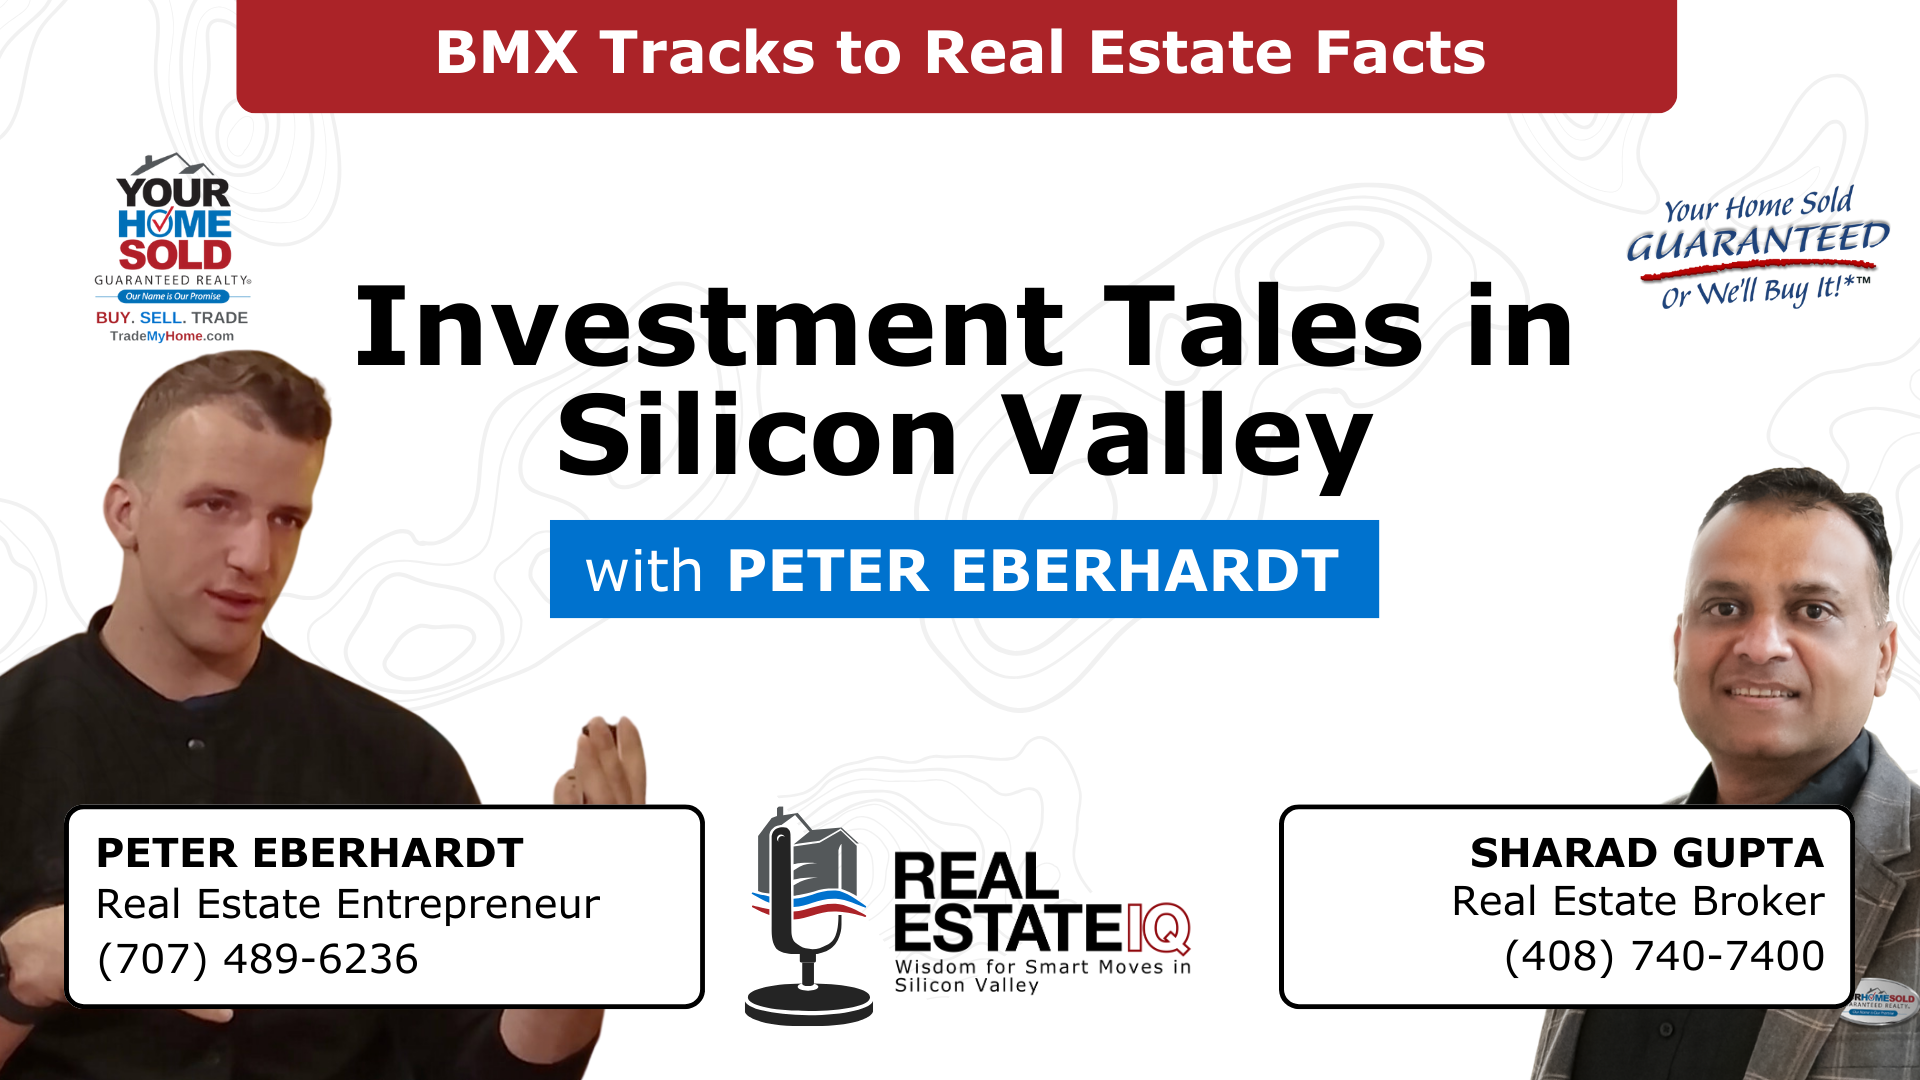 BMX Tracks to Real Estate Facts: Peter's Silicon Valley Investment Tale